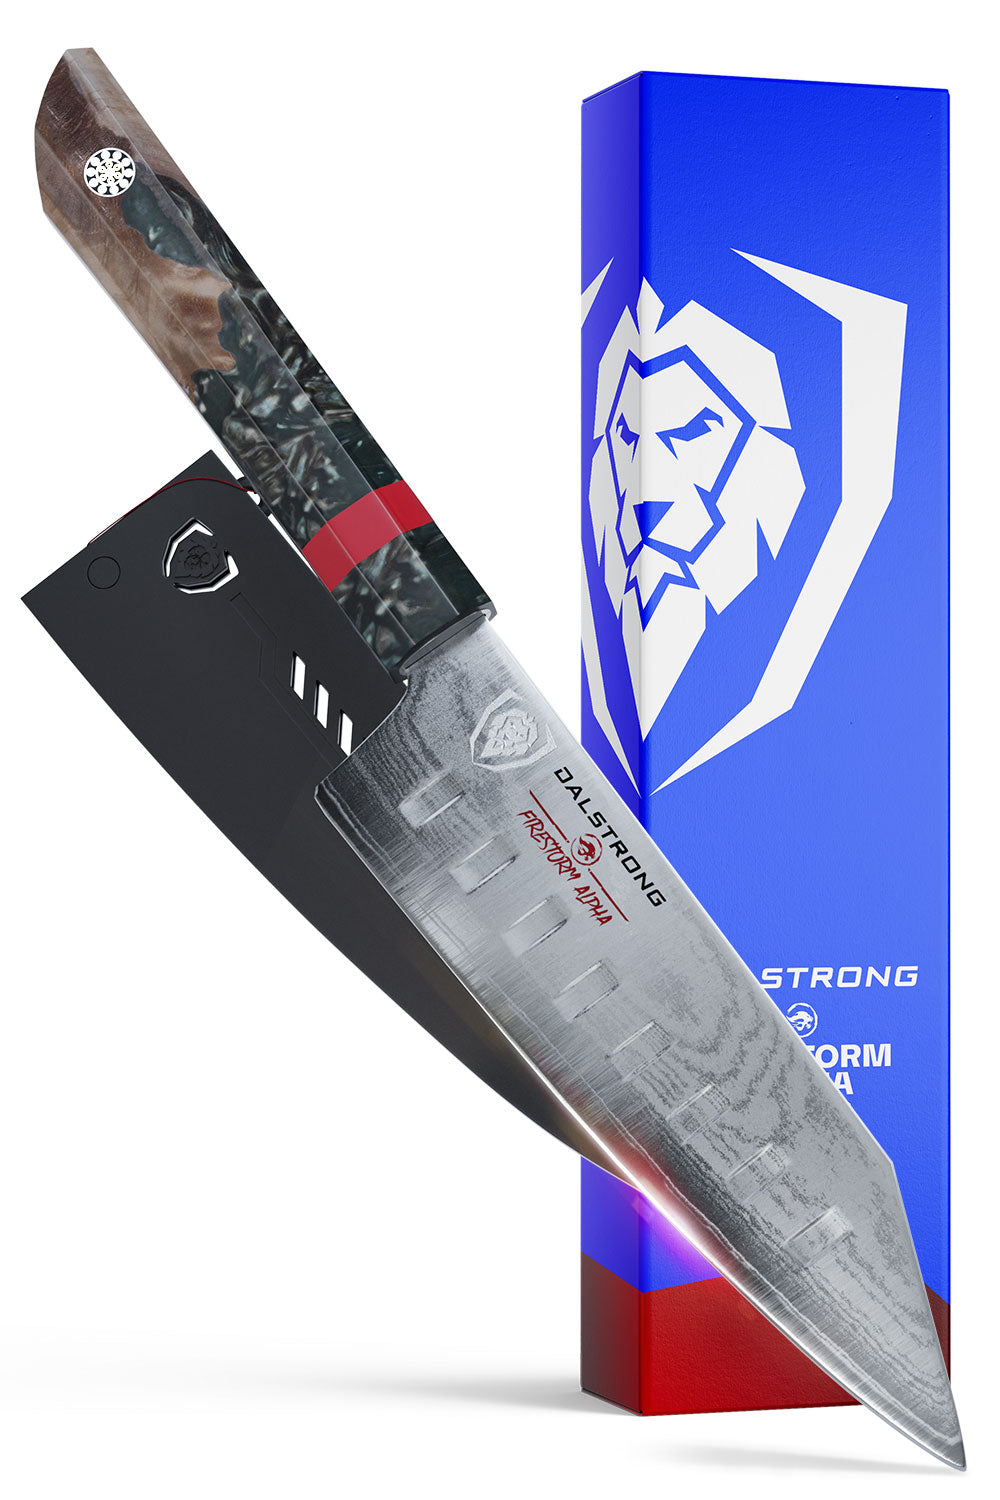 Dalstrong firestorm alpha series 7 inch santoku knife in front of it's premium packaging.